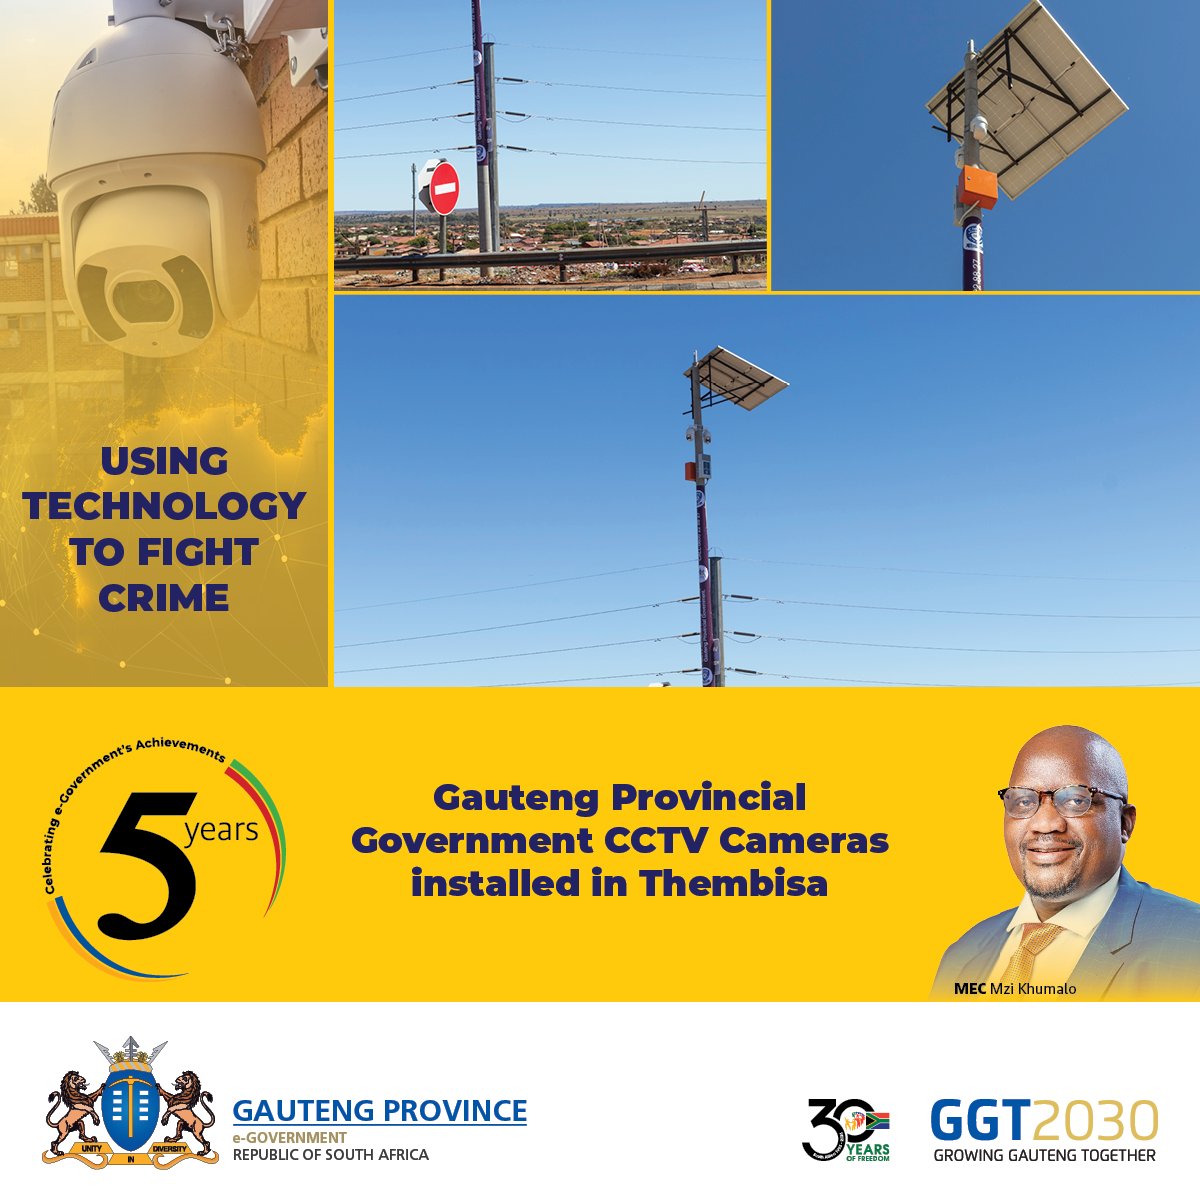 We're stepping up our efforts to keep our community safe with the installation of #CCTVcameras across Tembisa. 🎥 These cameras are a powerful tool in our fight against crime, helping to deter criminals and provide crucial evidence for law enforcement. #GGT2030